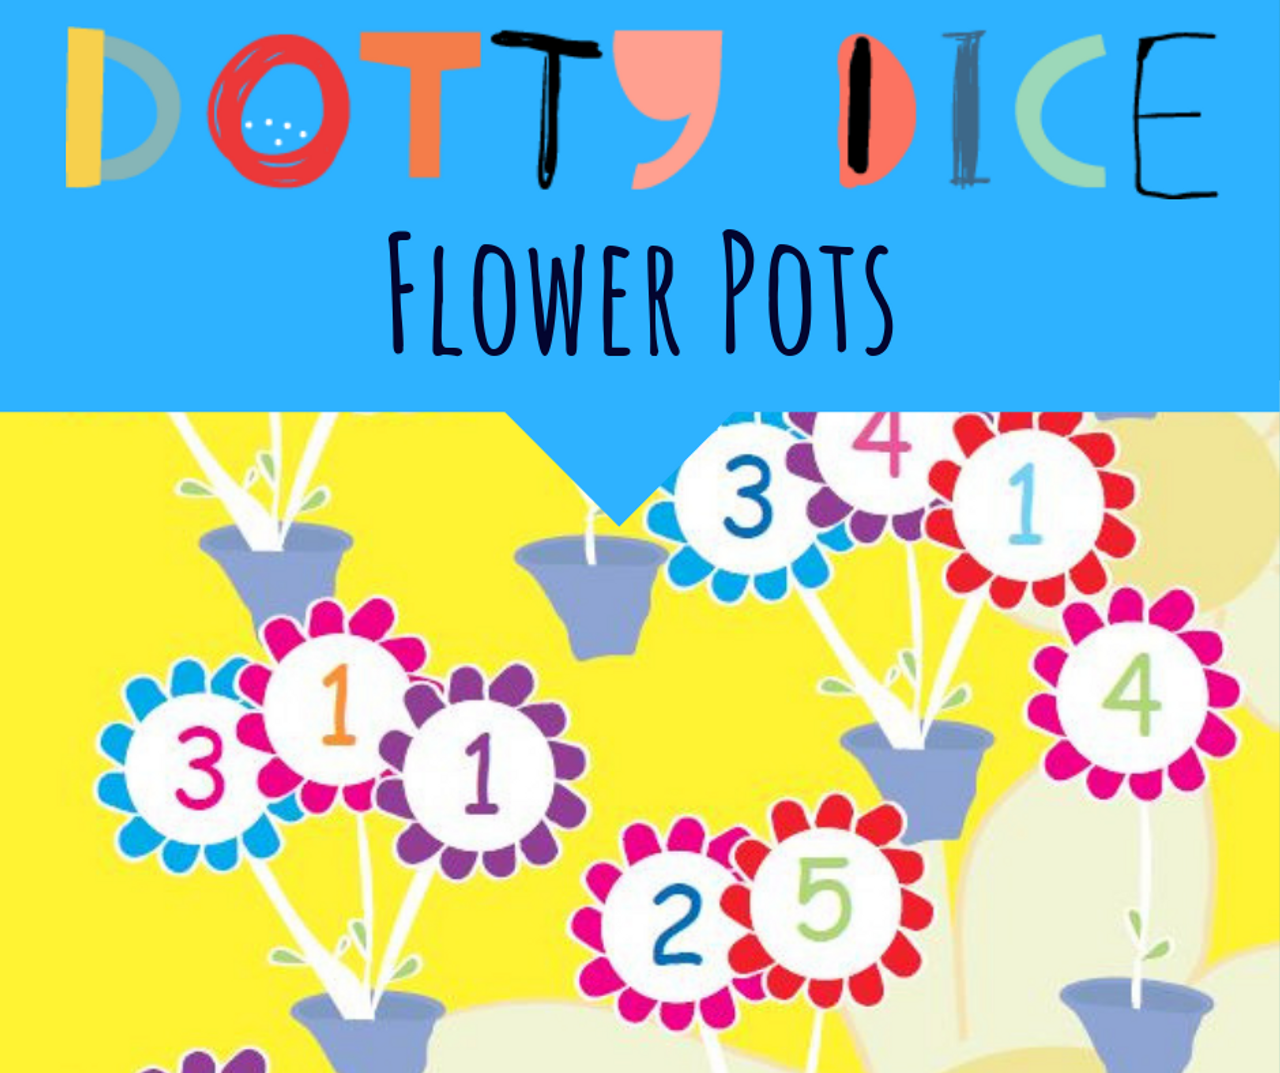 Flower Pots 
Counting from one on materials:- Groups within 5 (? +3=5)